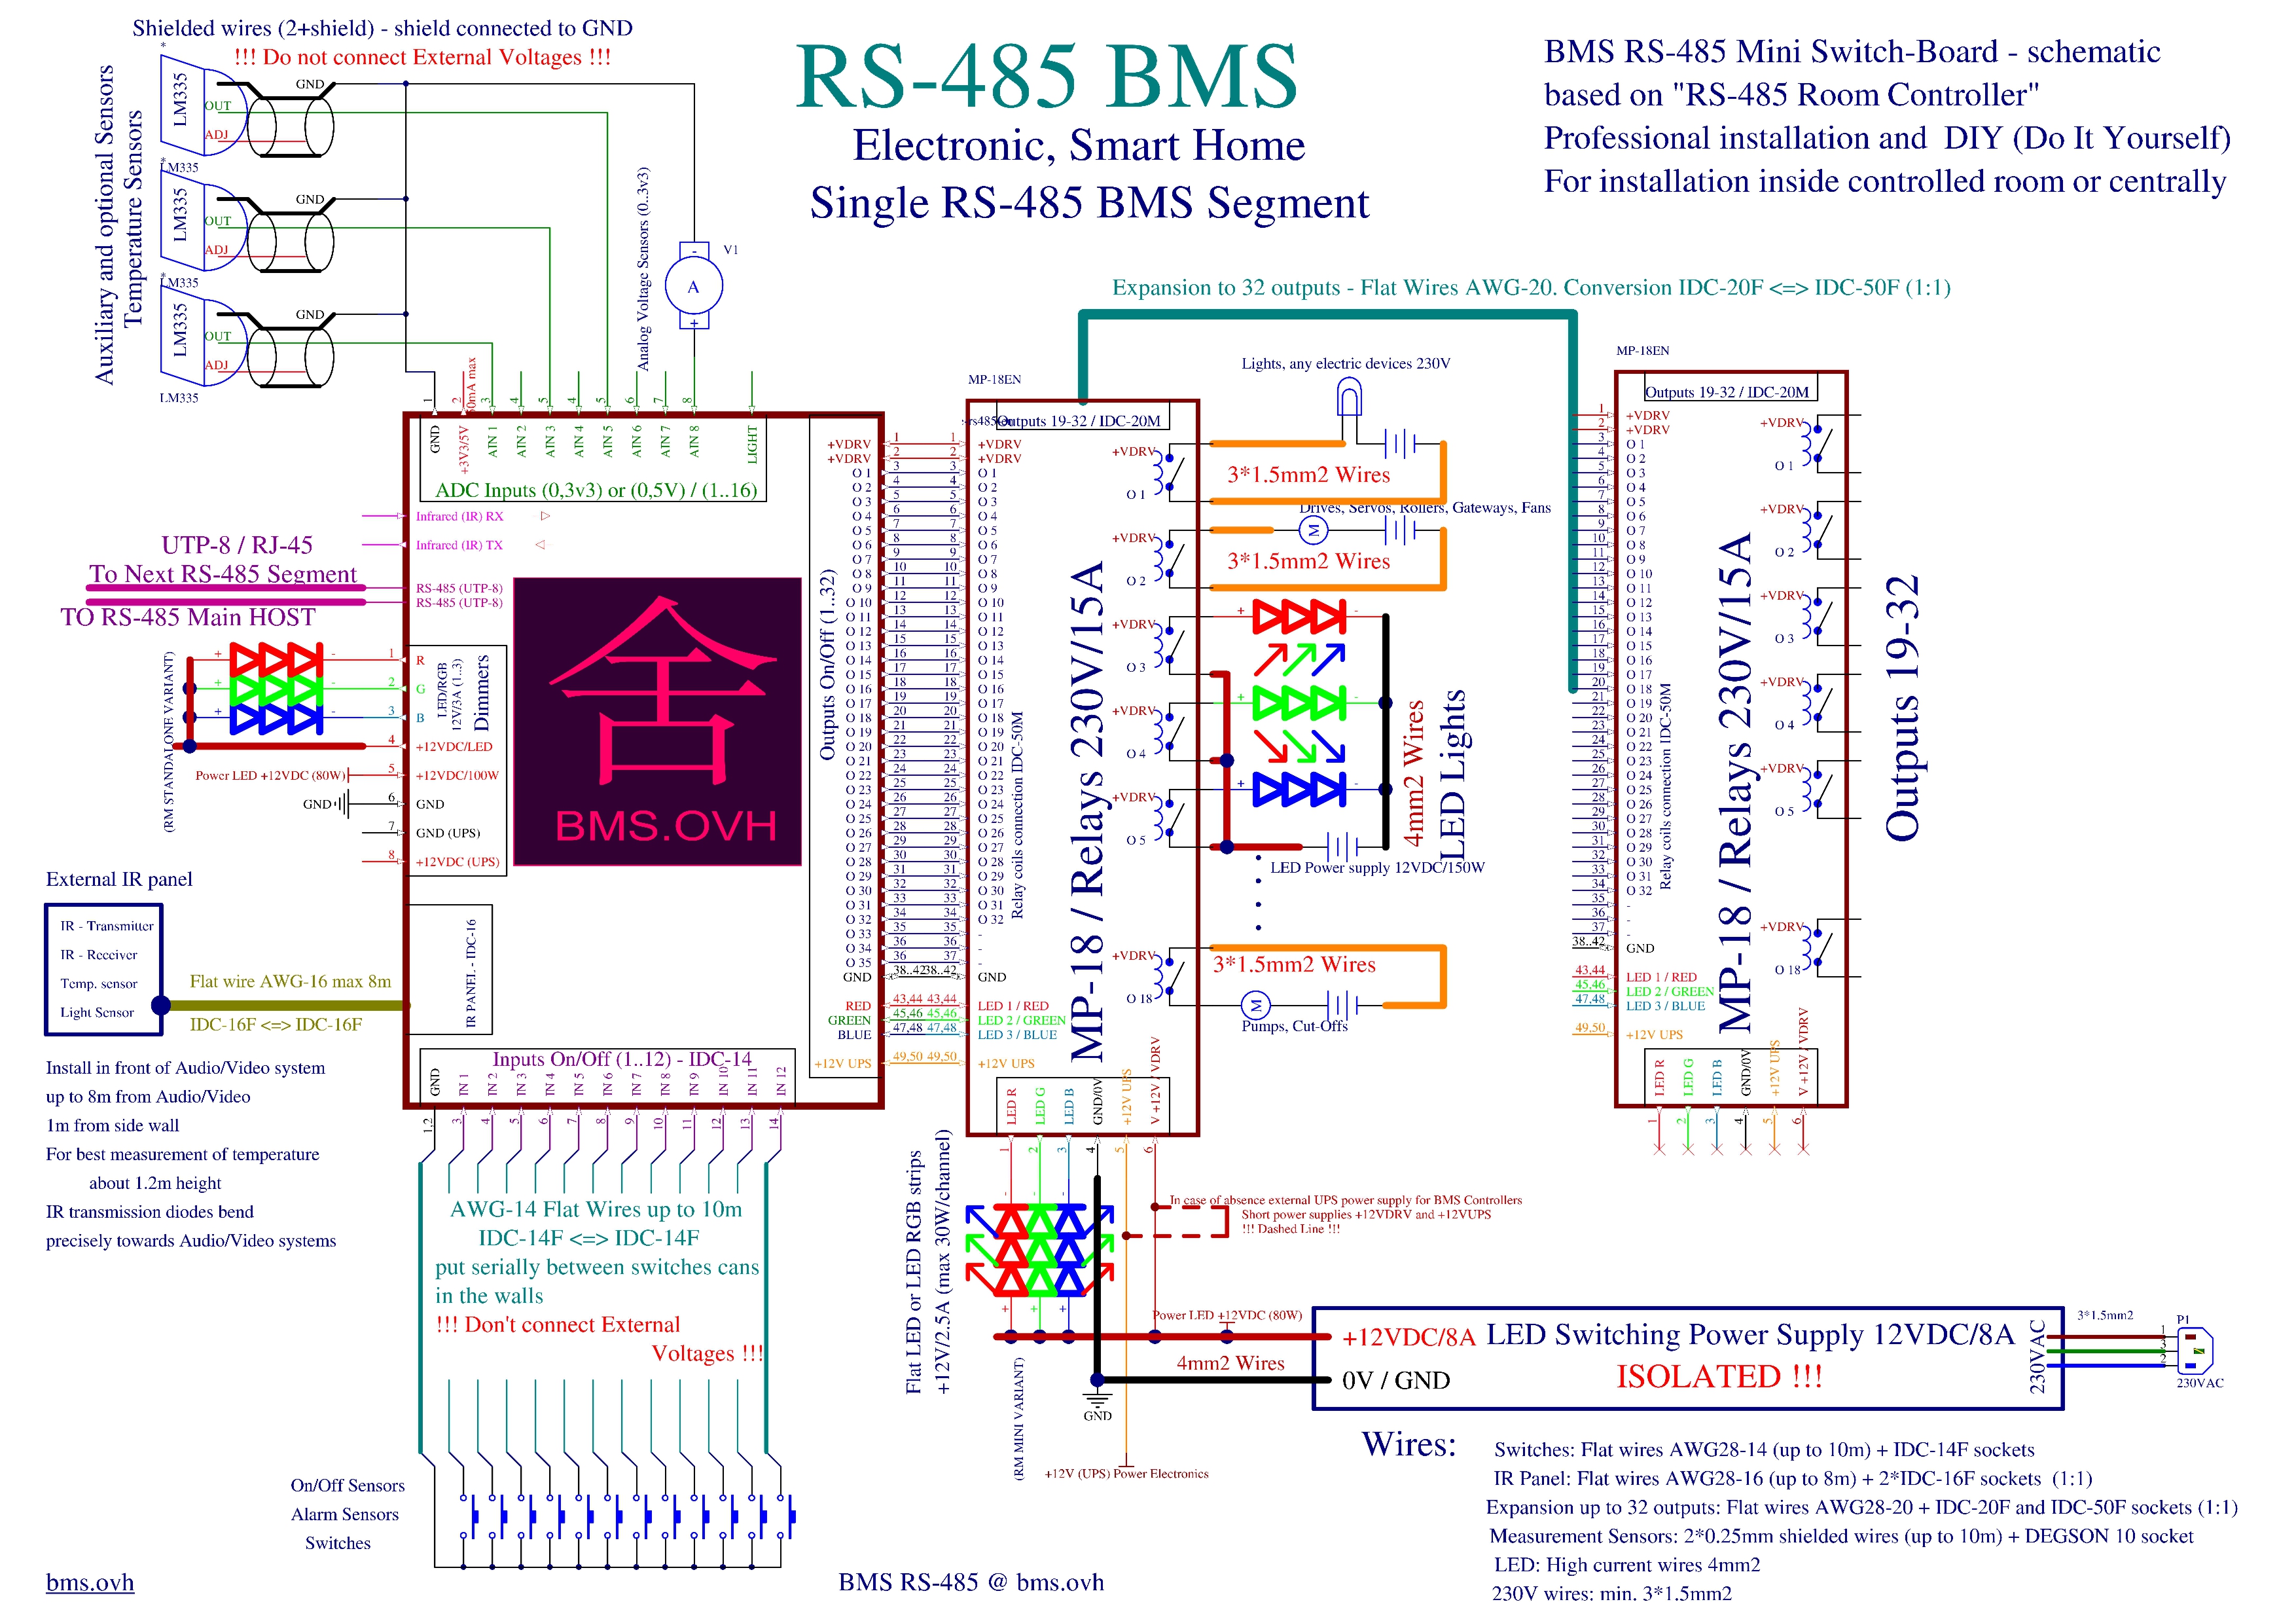 RS-485 BMS schematic